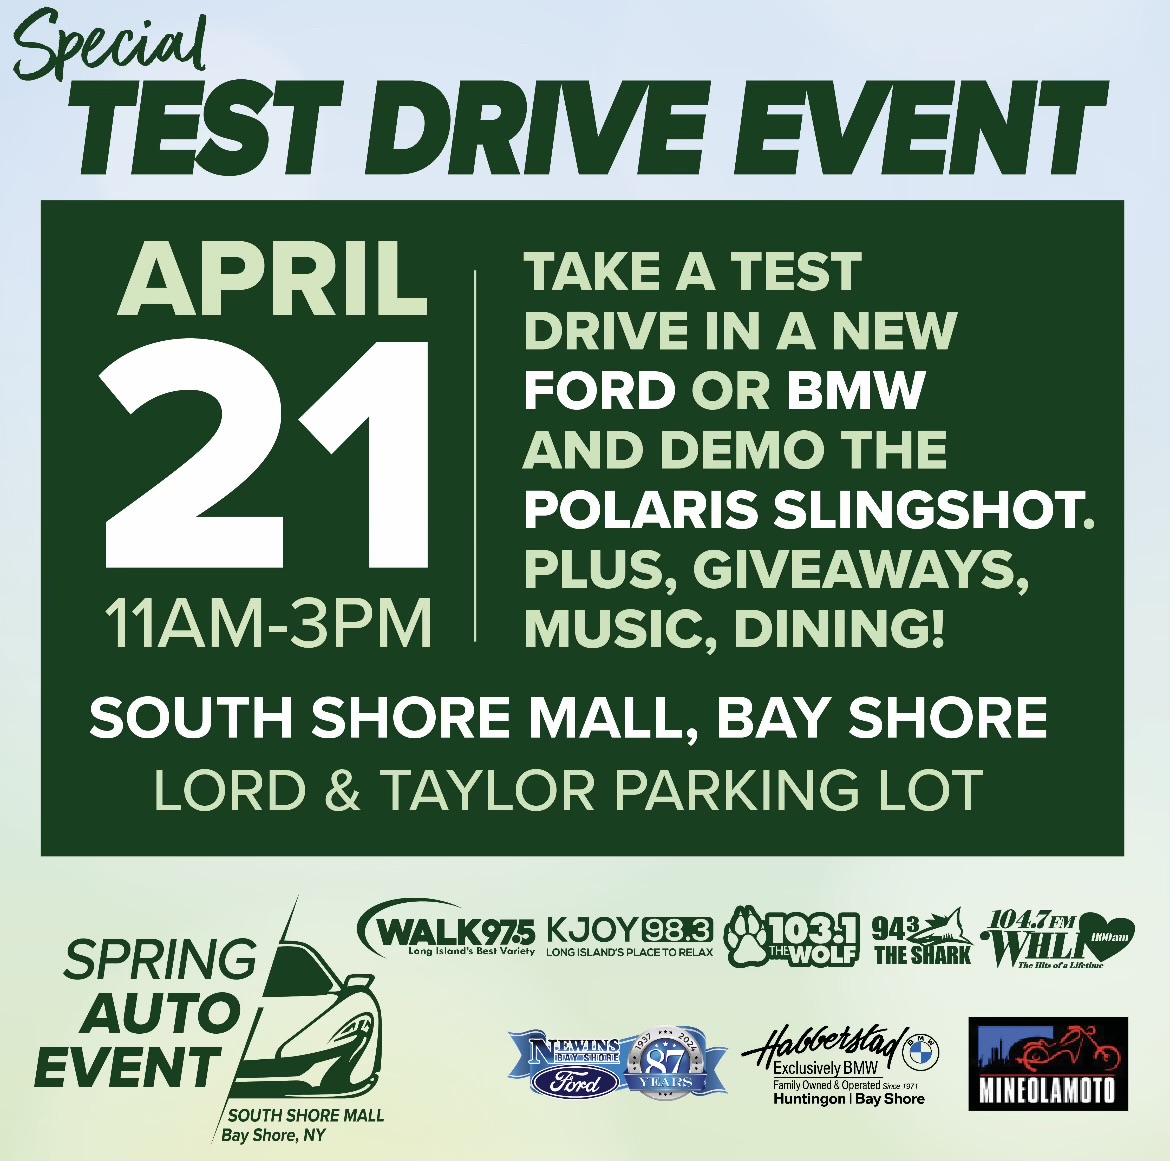 Special Test Drive Event